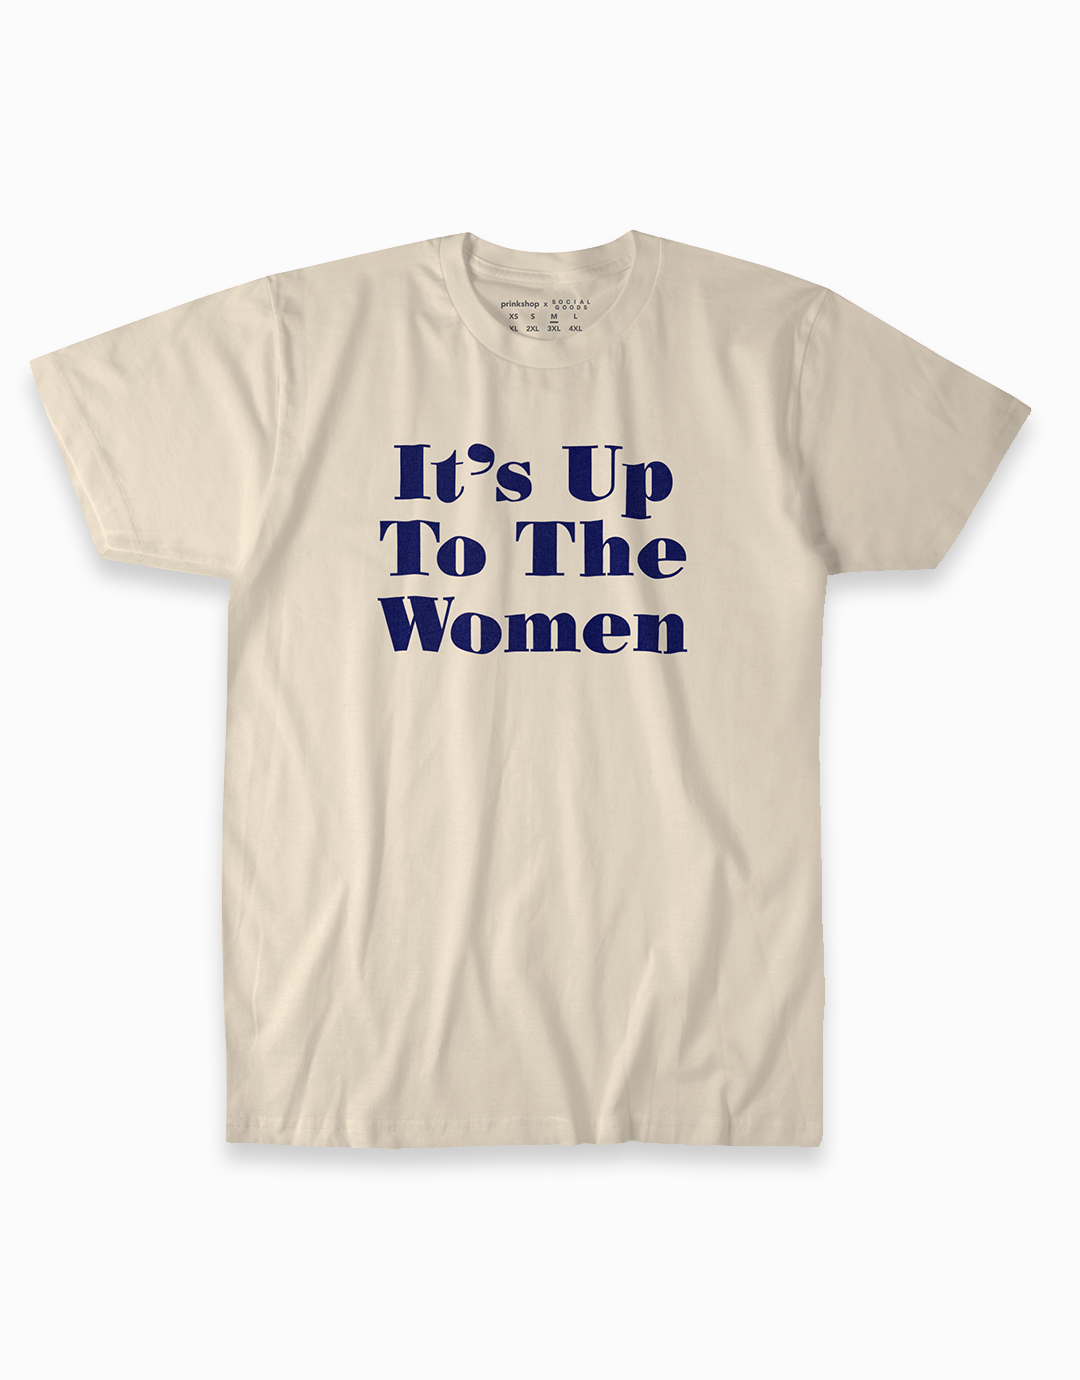 It's Up To The Women Tee | Help Elect Women | Social Goods